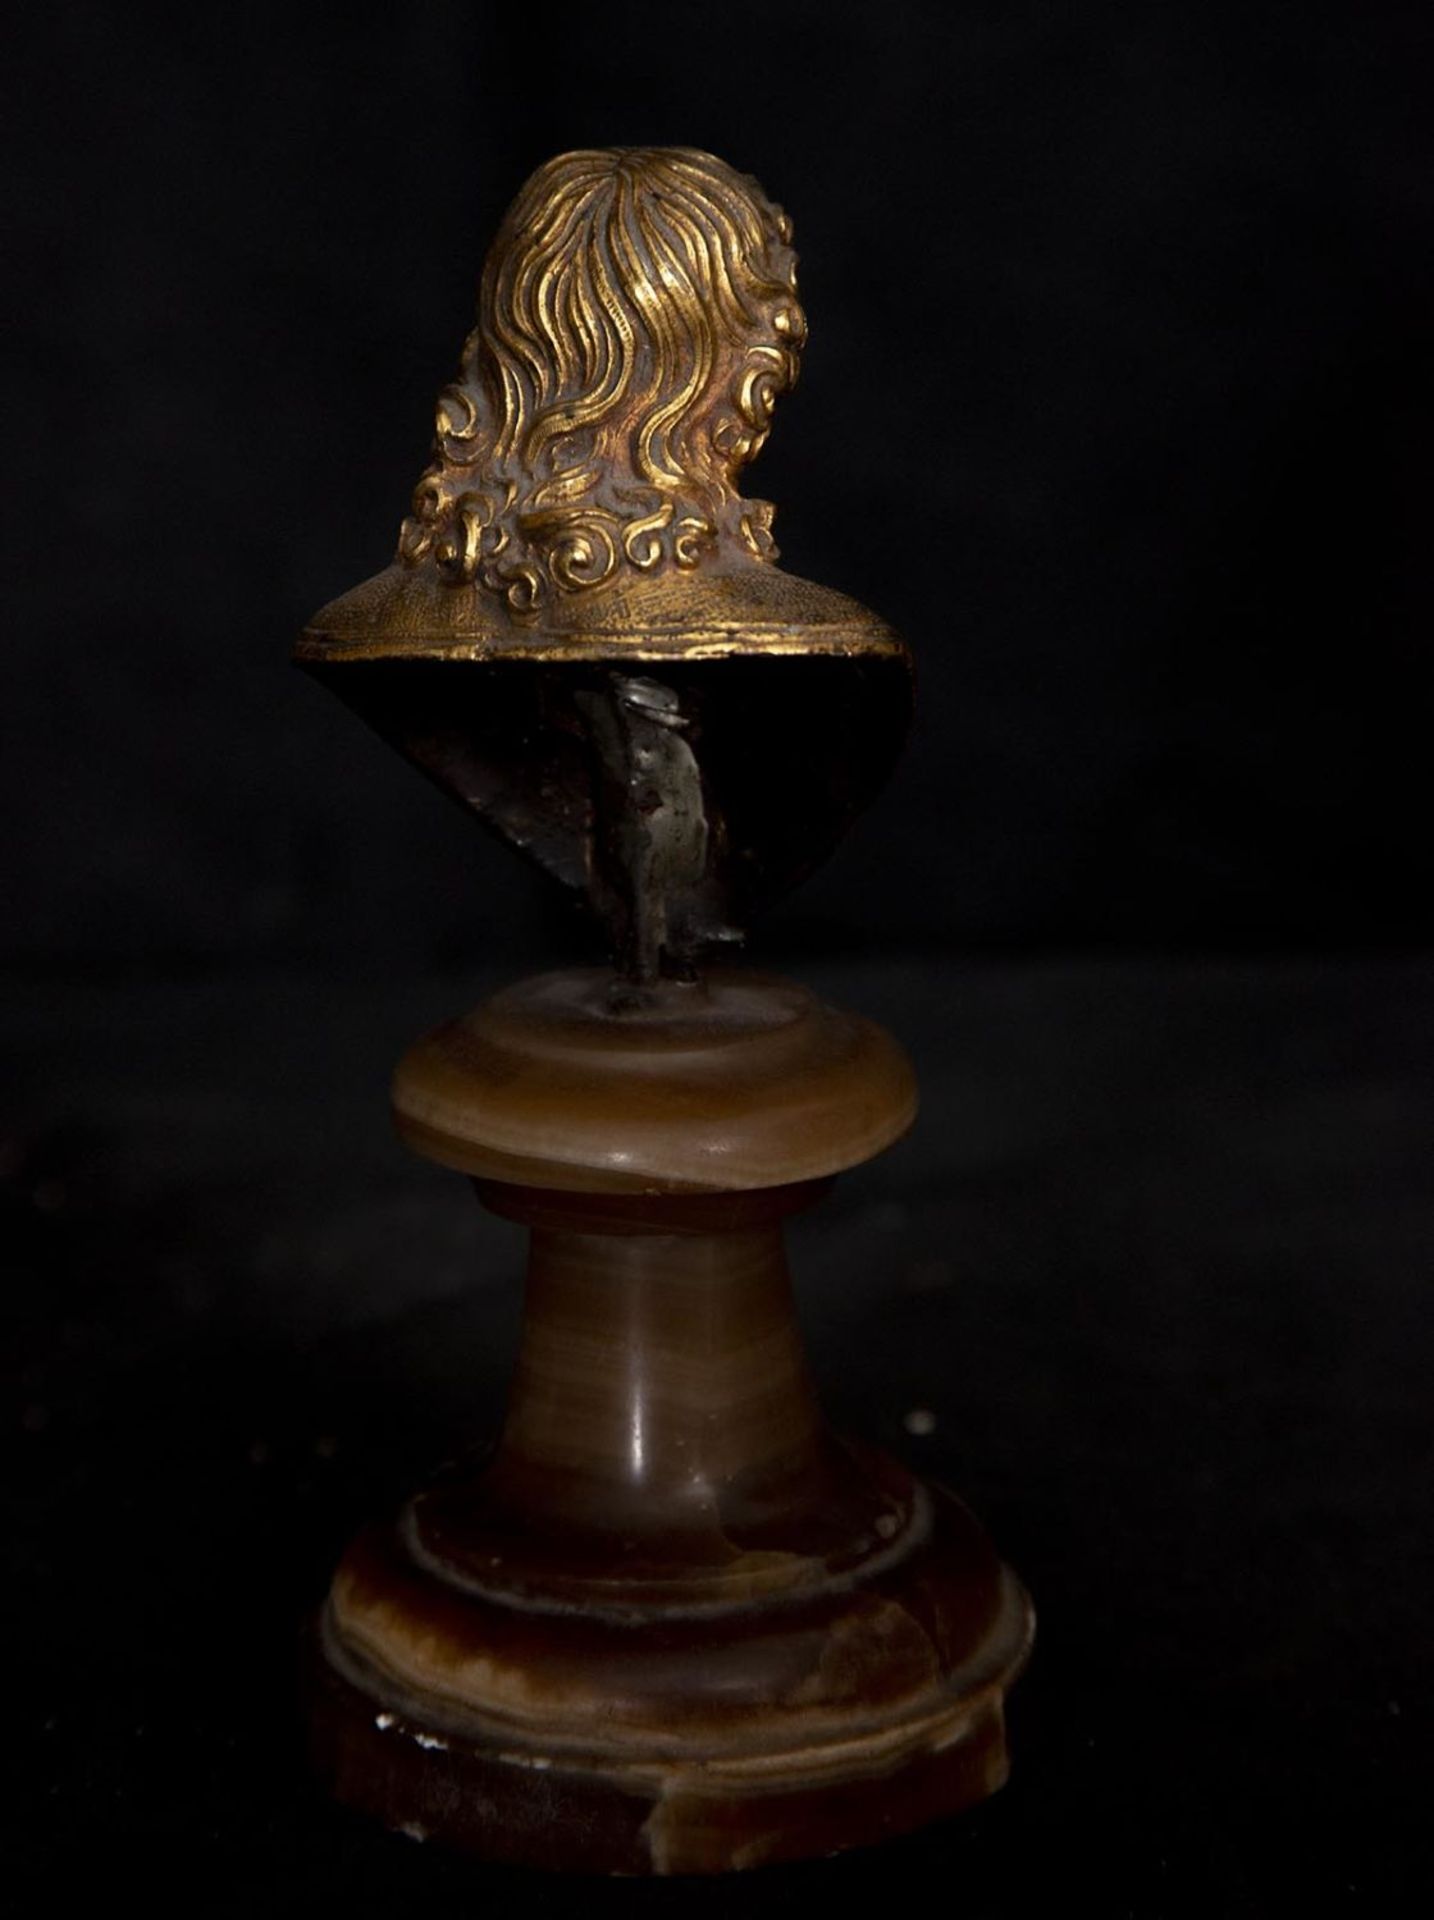 Exquisite bust in gilt bronze with onyx base, Italian school of Alessandro Algardi, Italy, 17th cent - Image 5 of 5